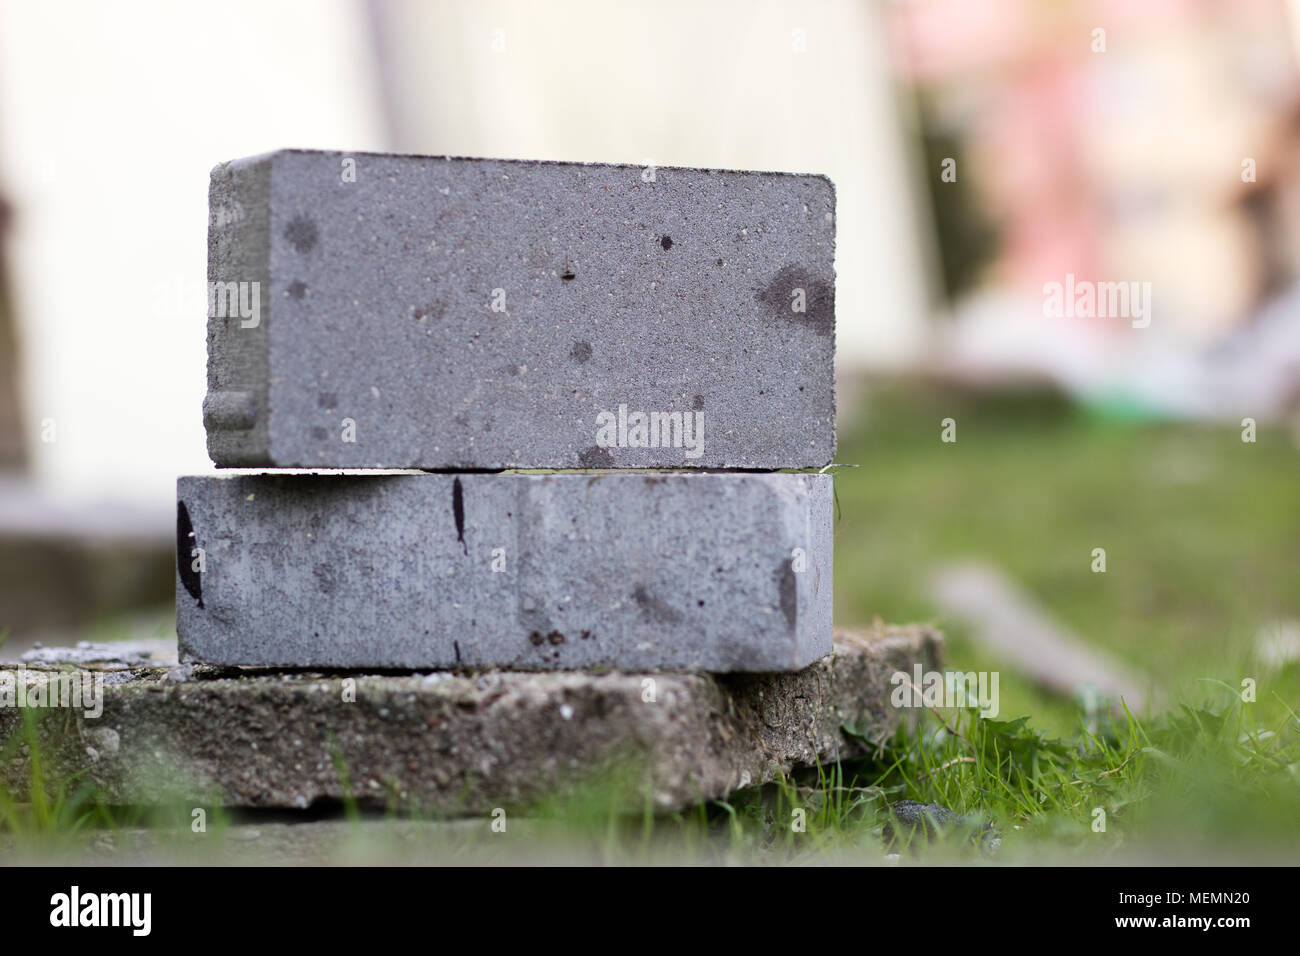 Concrete block used in construction. Building materials for paverists. Season of the spring. Stock Photo